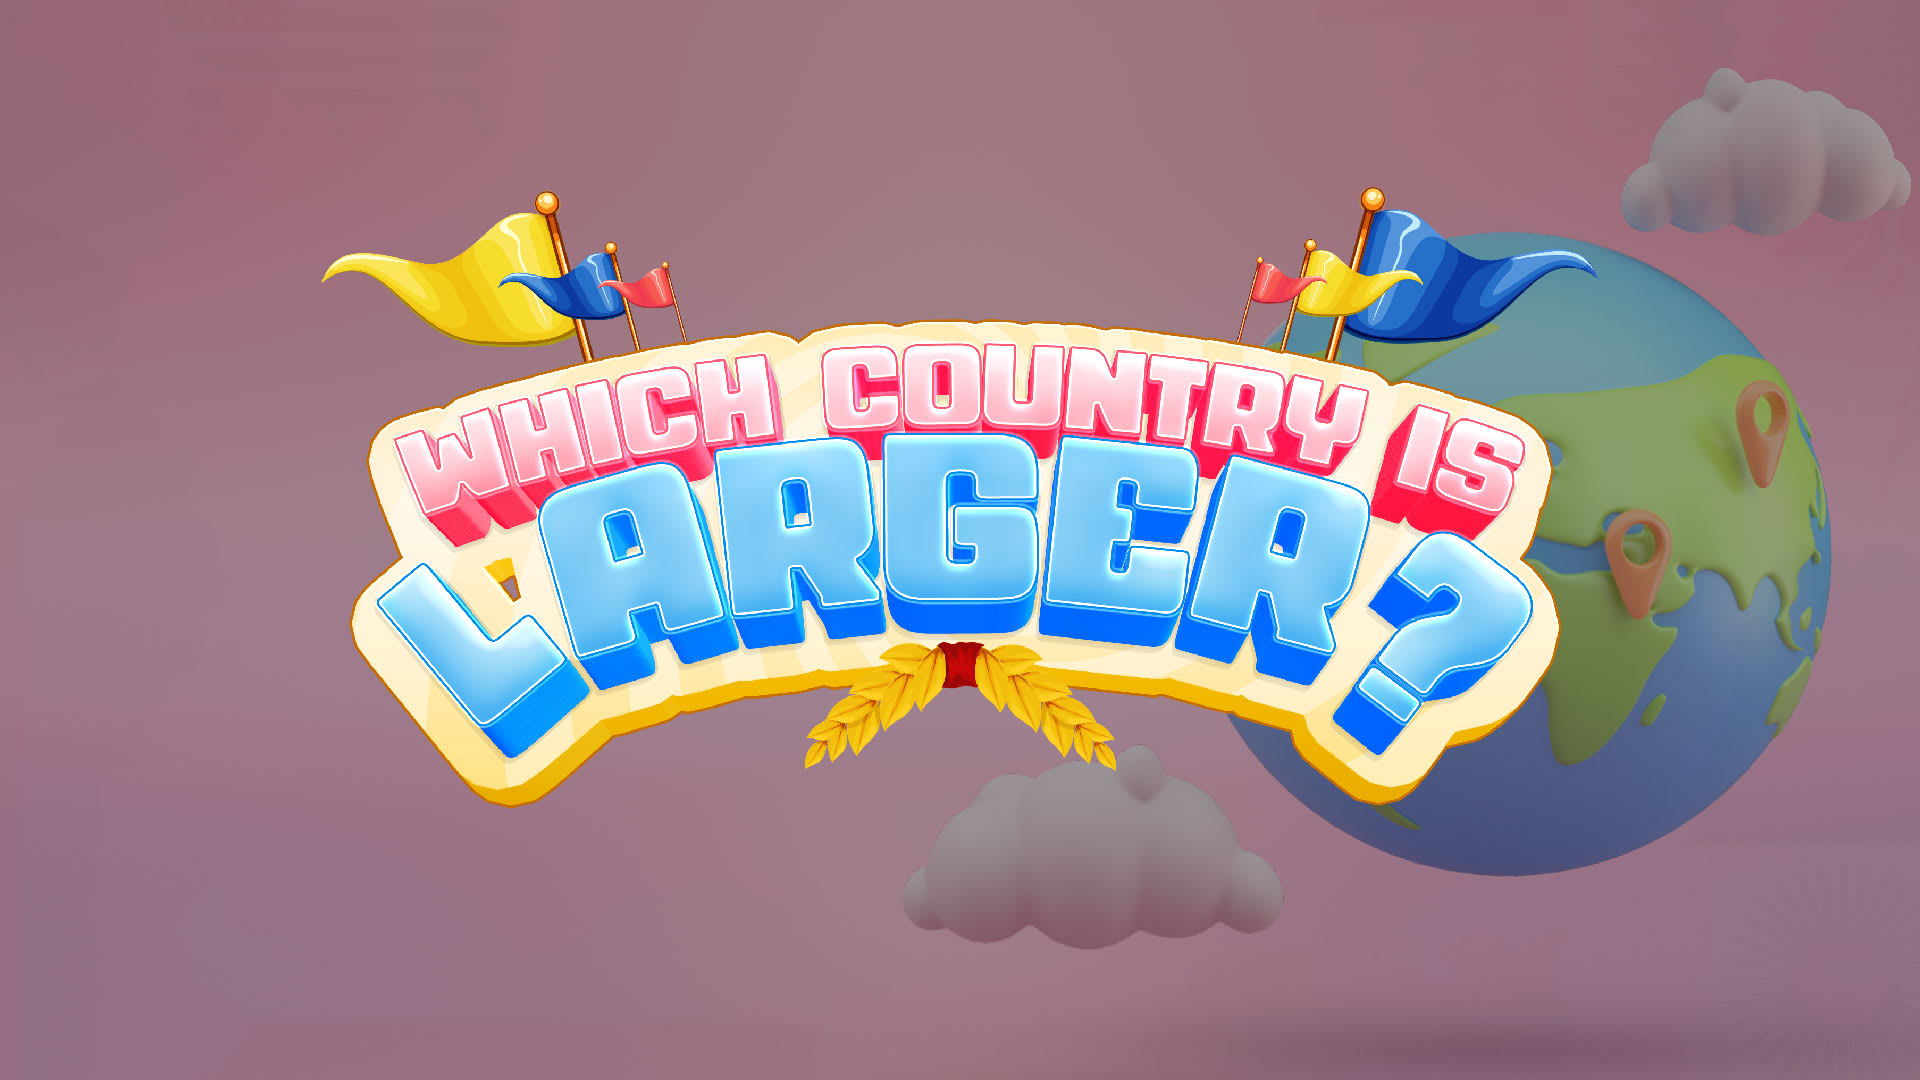 Which Country Is Larger? 1